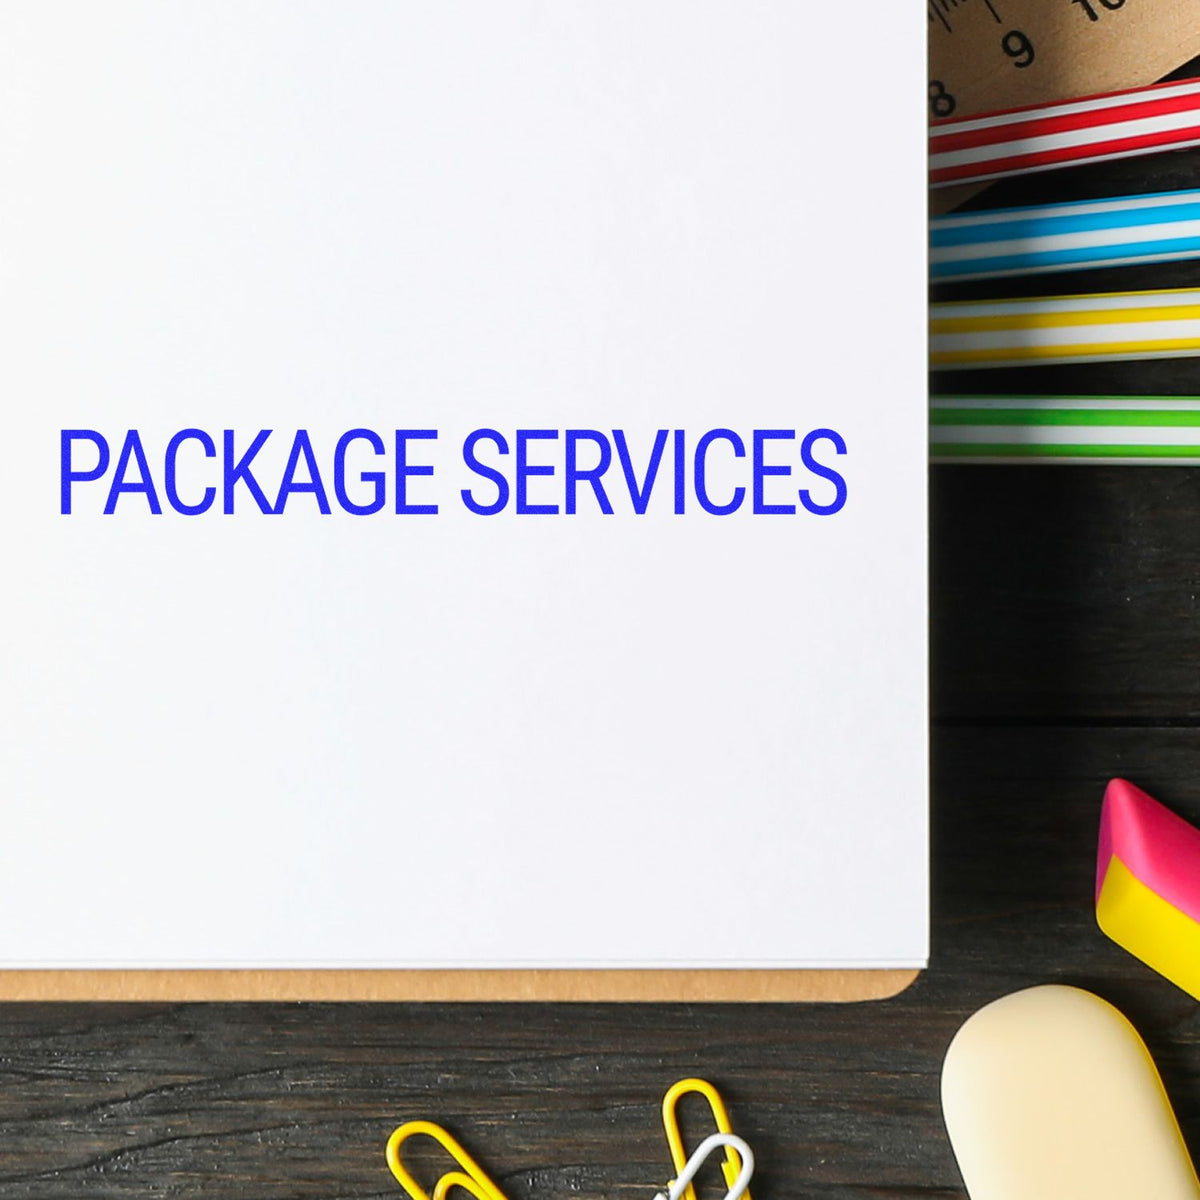 Large Package Services Rubber Stamp In Use Photo